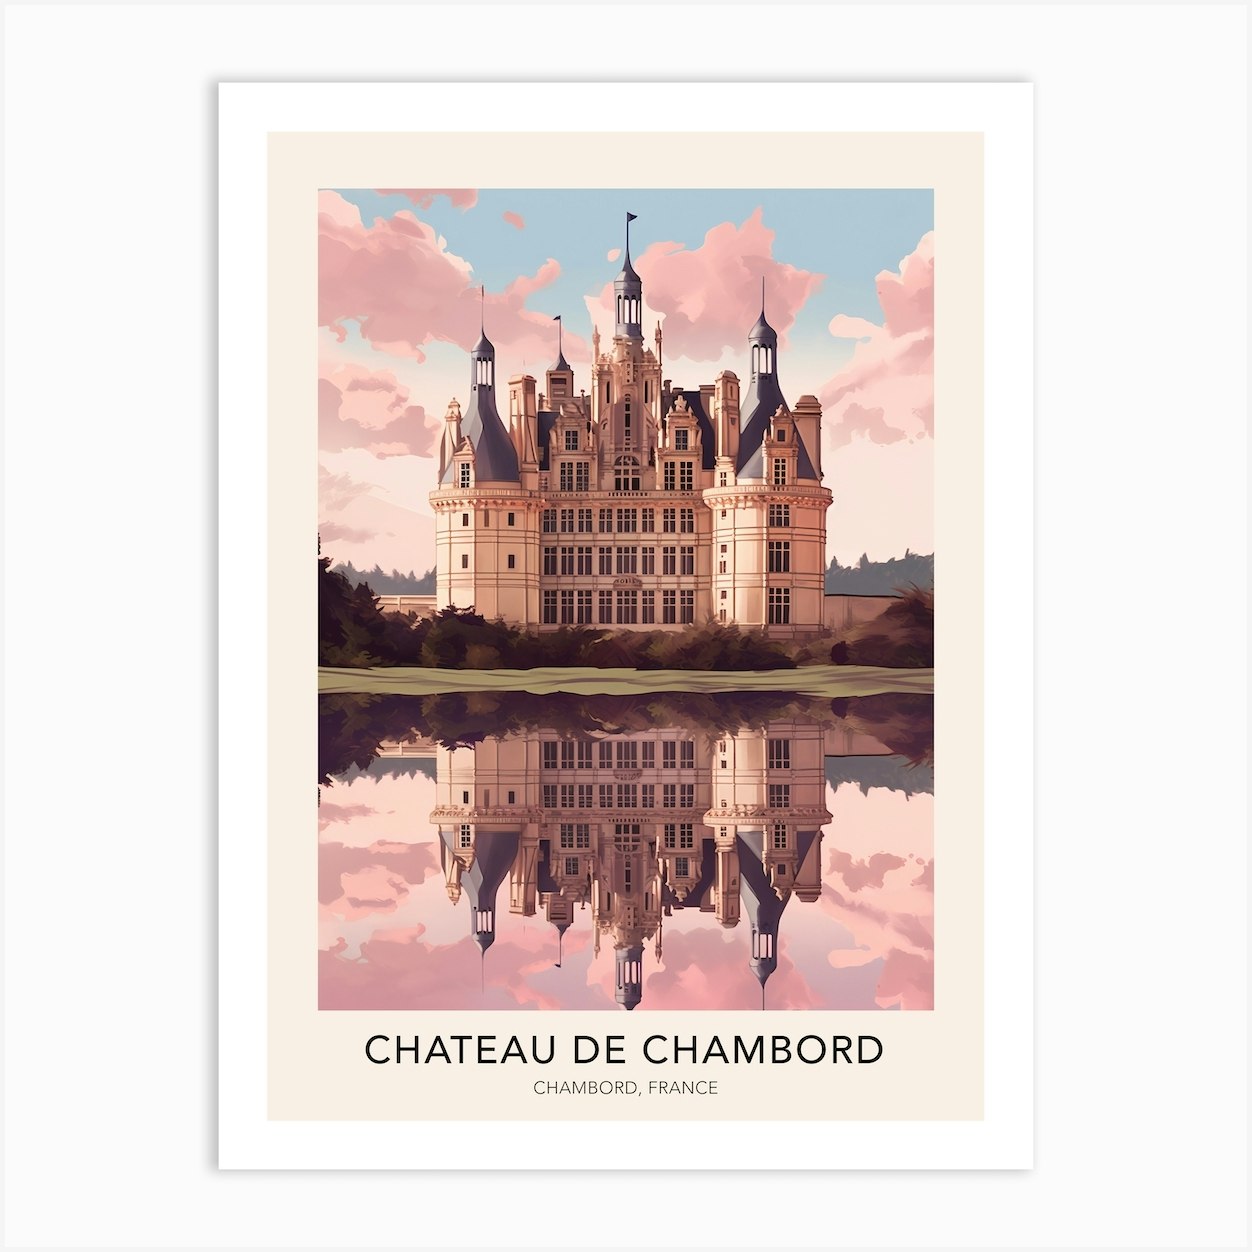 Chateau De Chambord France Travel Poster Art Print by The Art of Adventure  - Fy